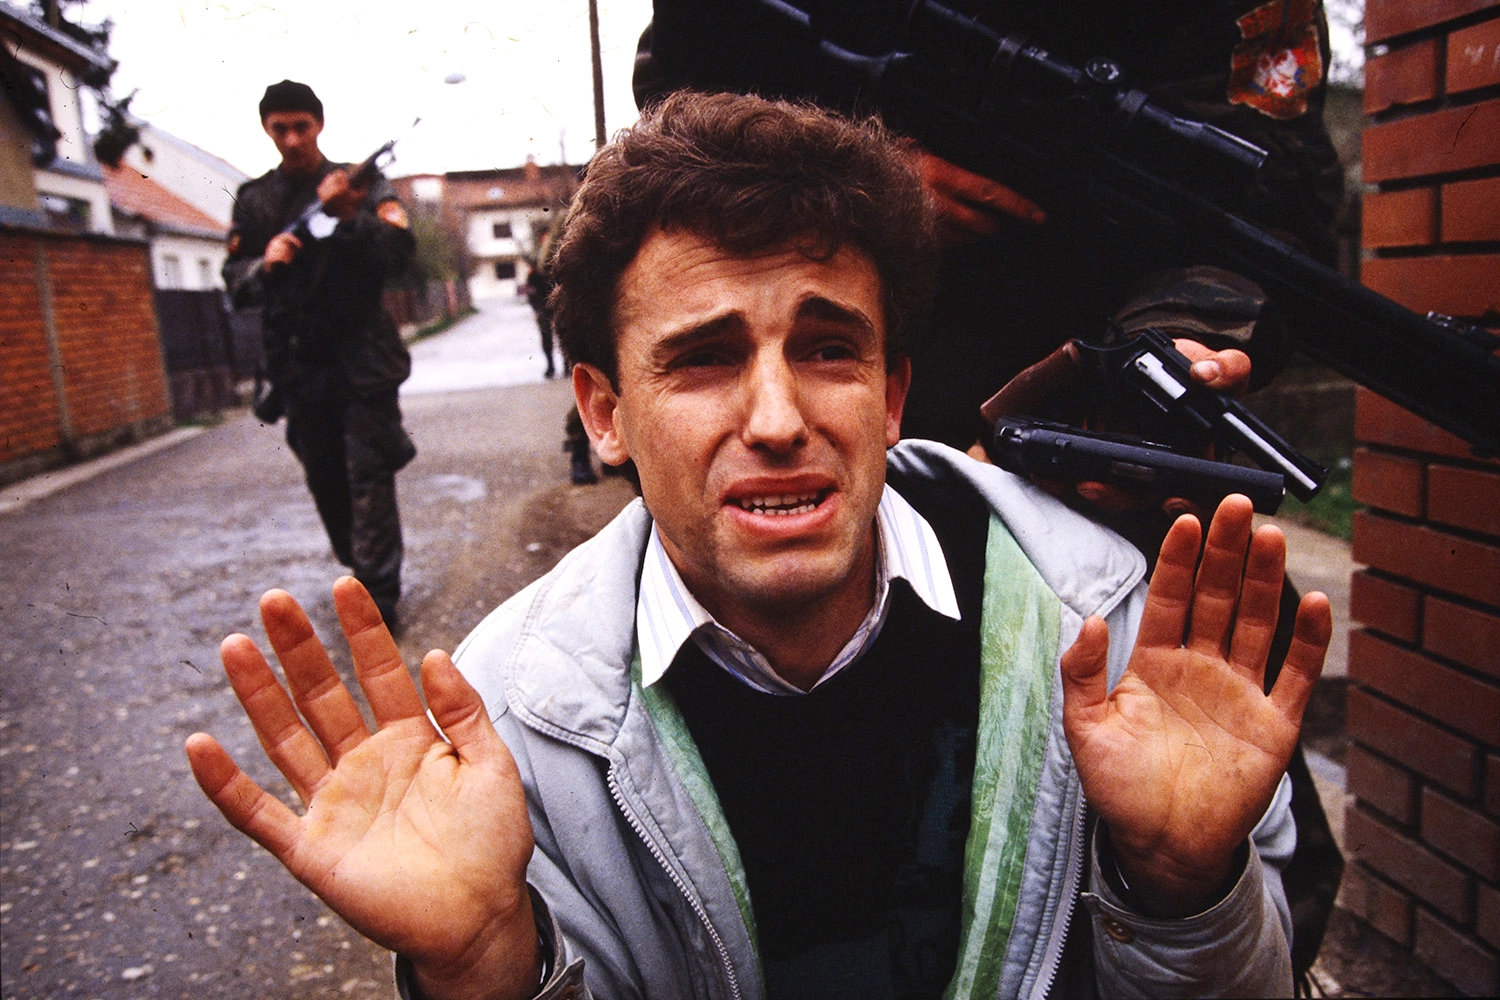 Hajrush Ziberi begs for his life as members of Arkan's Tigers detain him. He was later found dead.